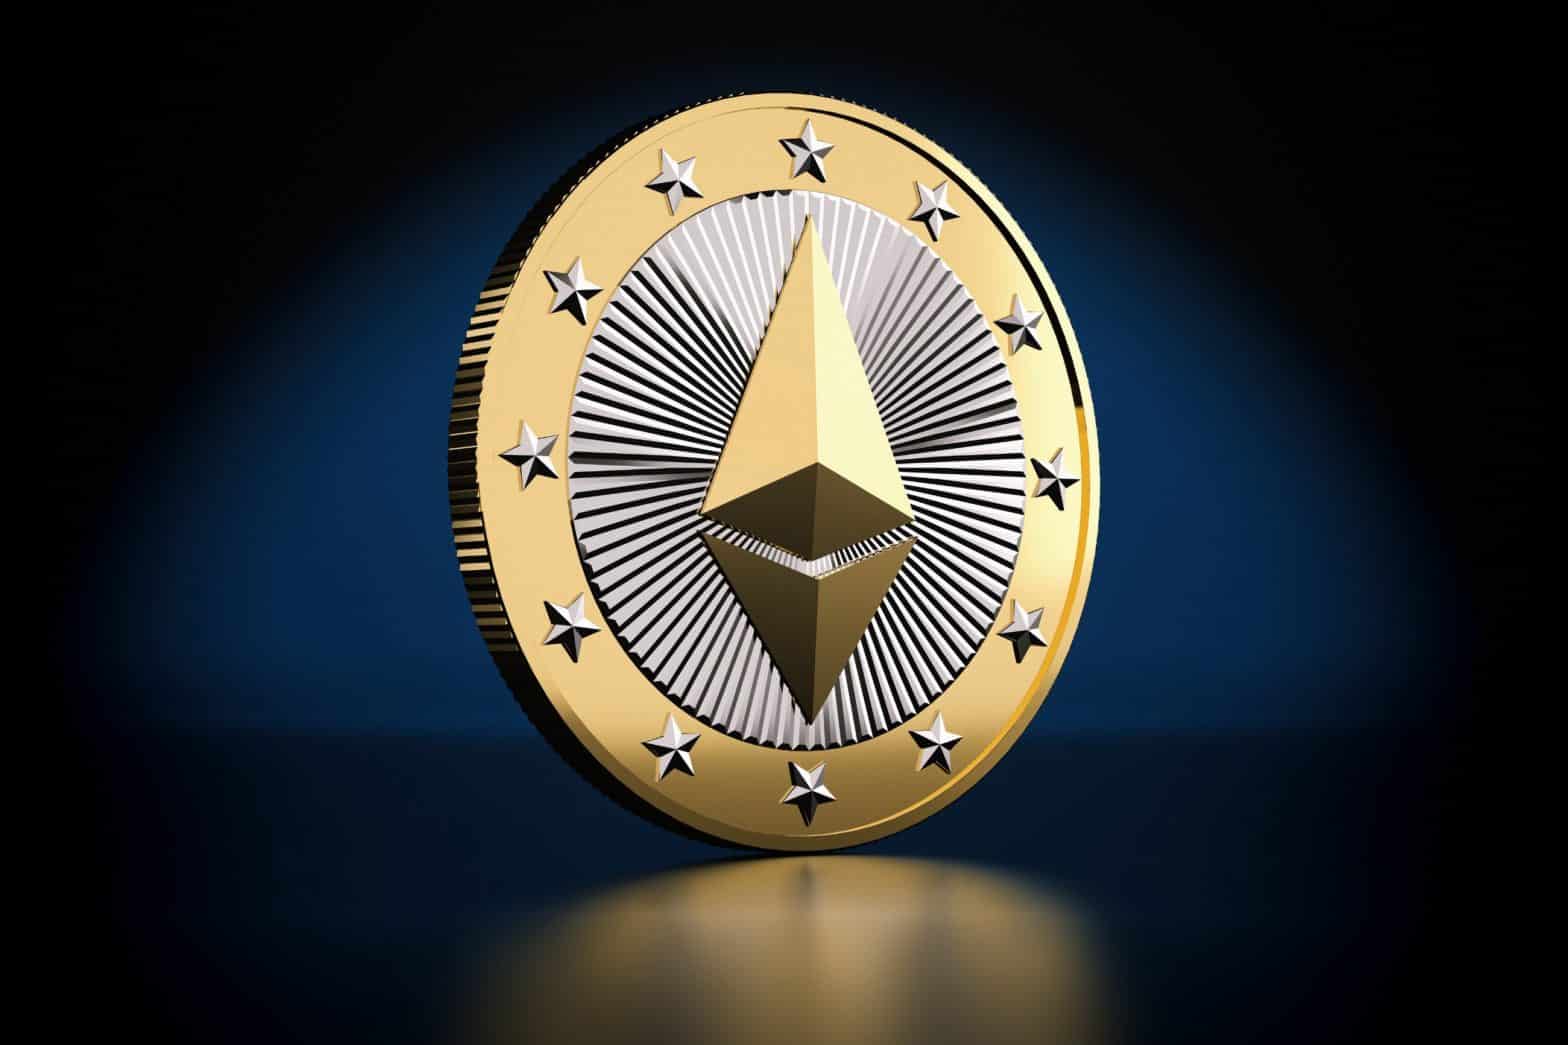  Ethereum (ETH) Loses 30.07% Over the Last 6 Months